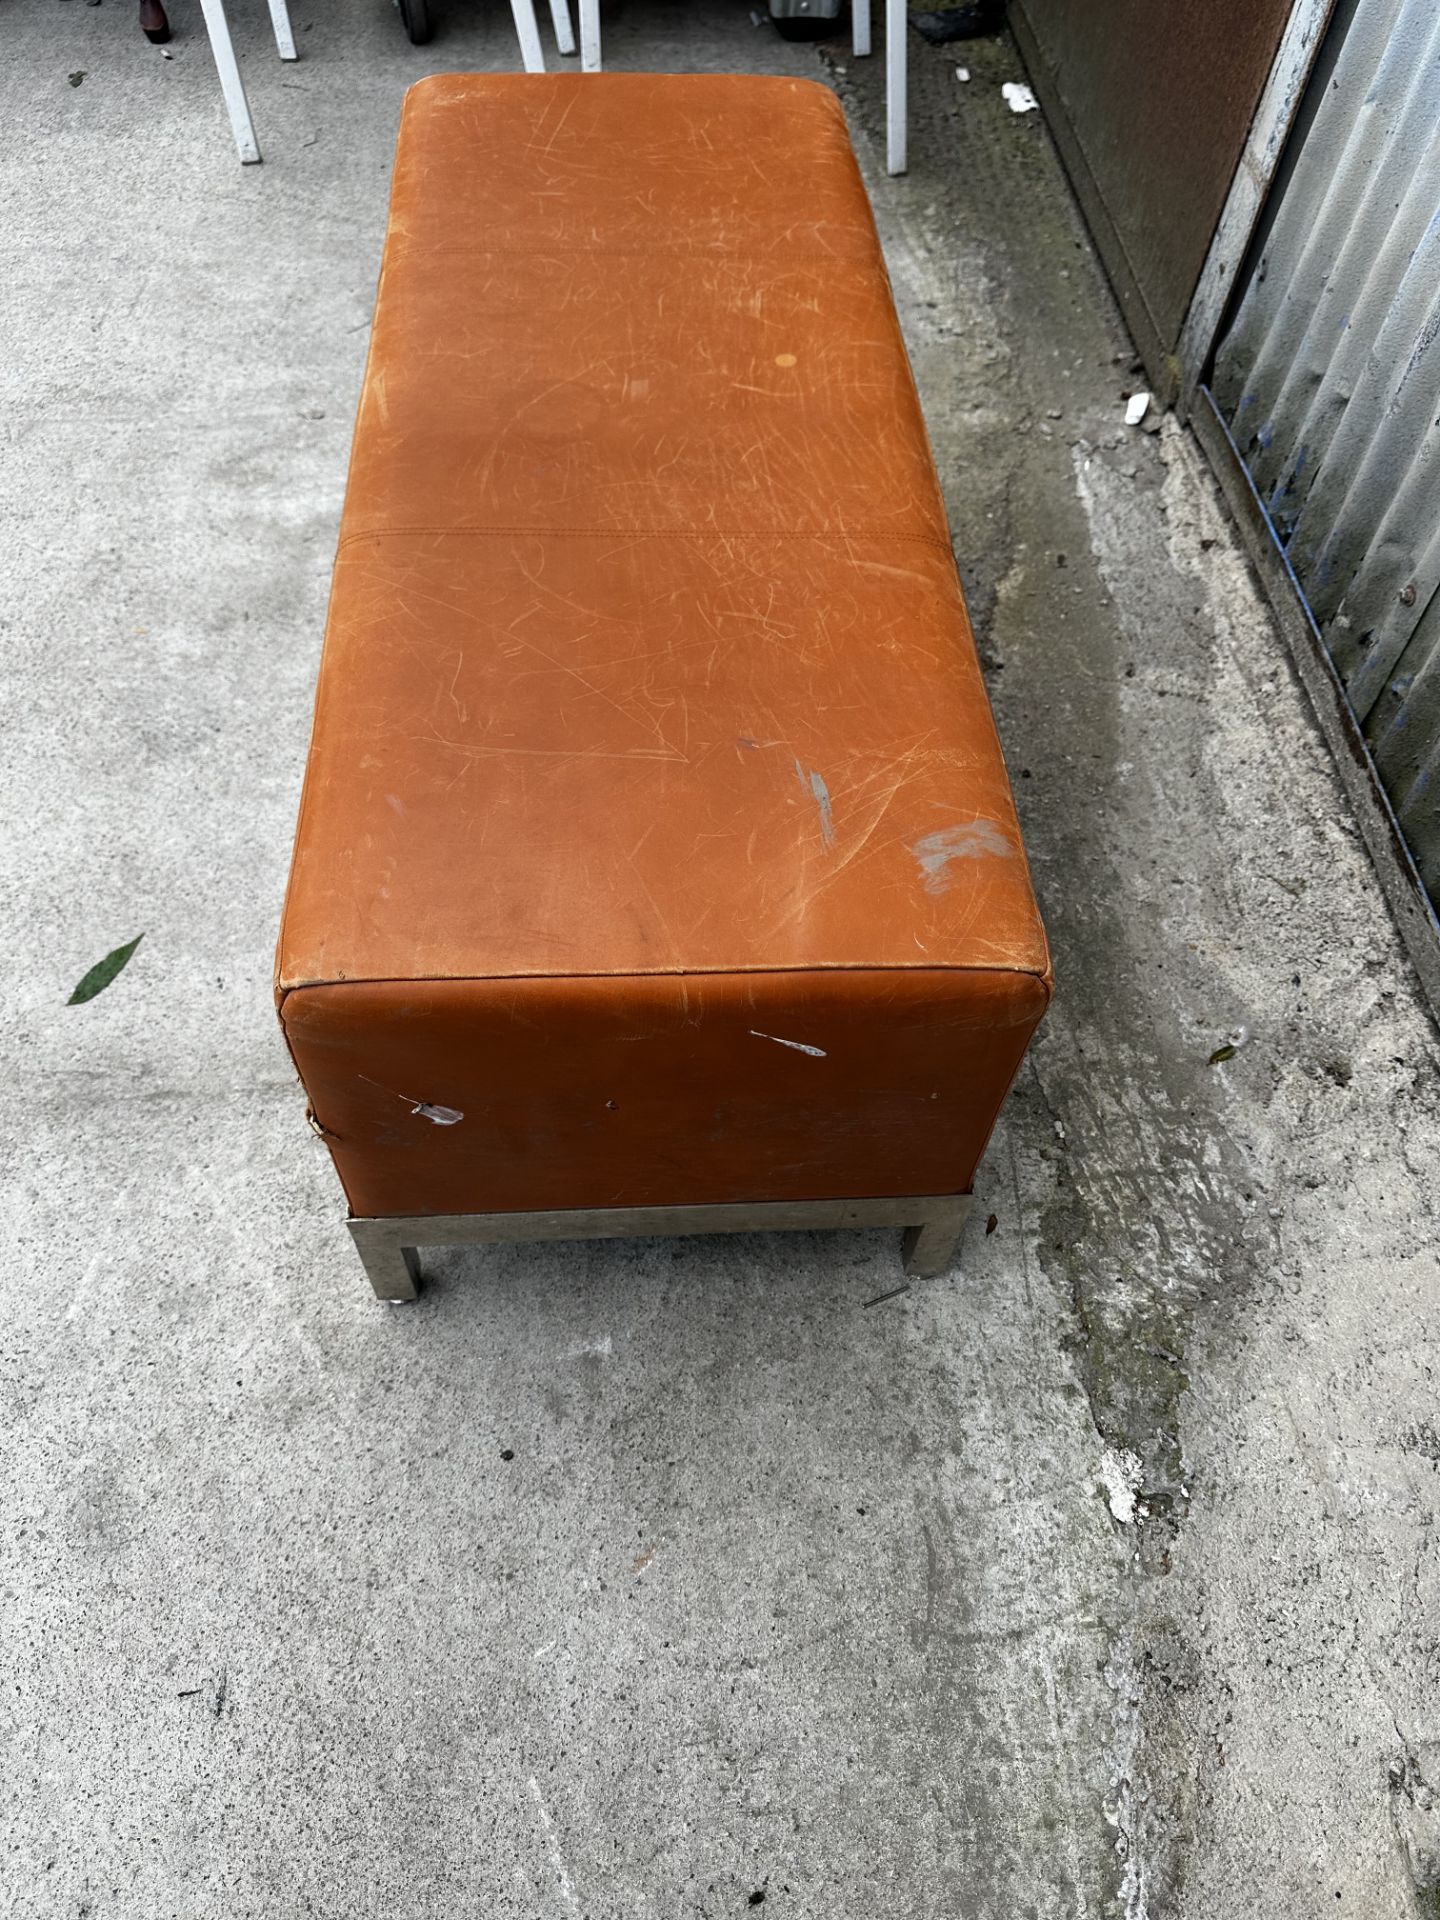 Vintage Look Leather Foot Stool 113*44*44cm Sourced From Luxury House Clearance - Image 2 of 2